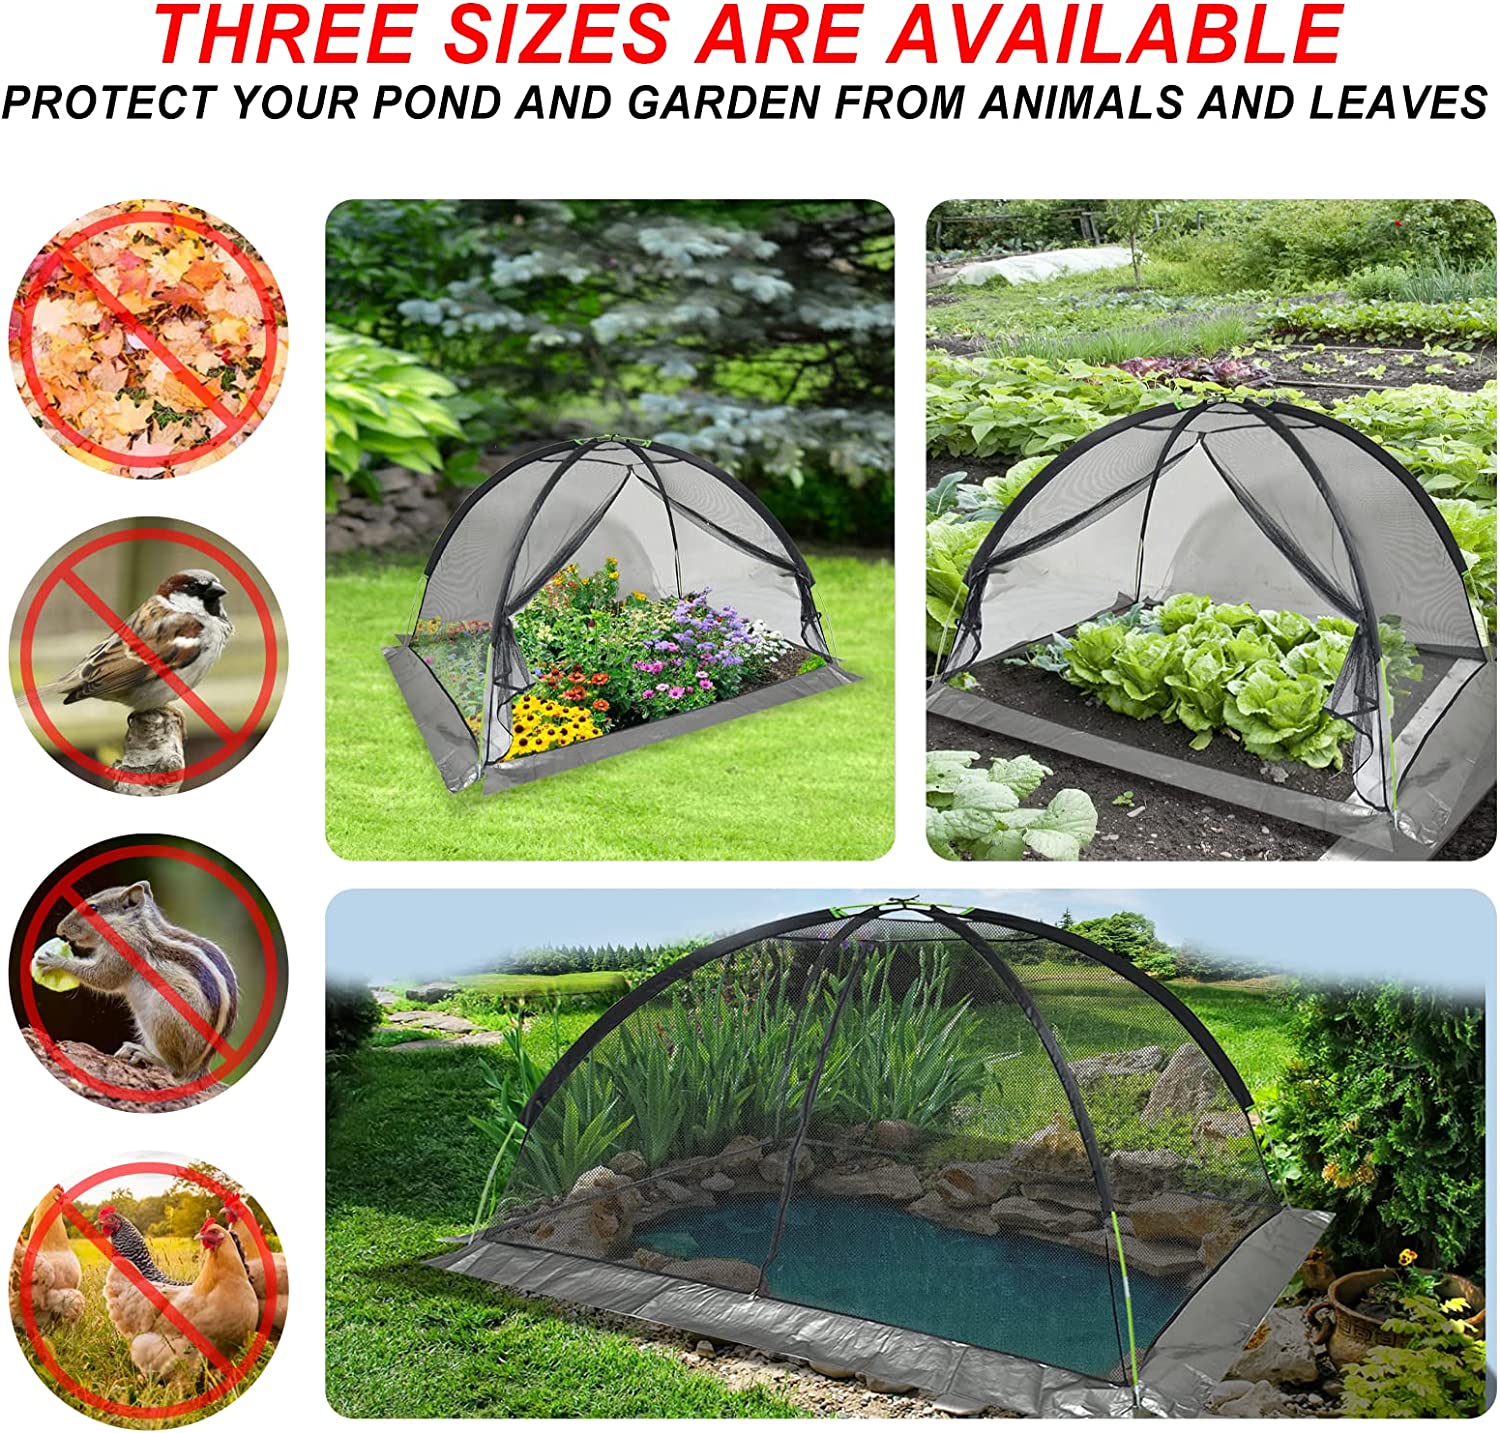 Pond Cover Garden Net - Pond Cover Dome, Garden Cover Net with Tent Ropes and Zippers, Nylon Pond Net Keeps Out Leaves, Animals, Debris for Garden Vegetable Plants Fields,Yard Pond 9X12 FT